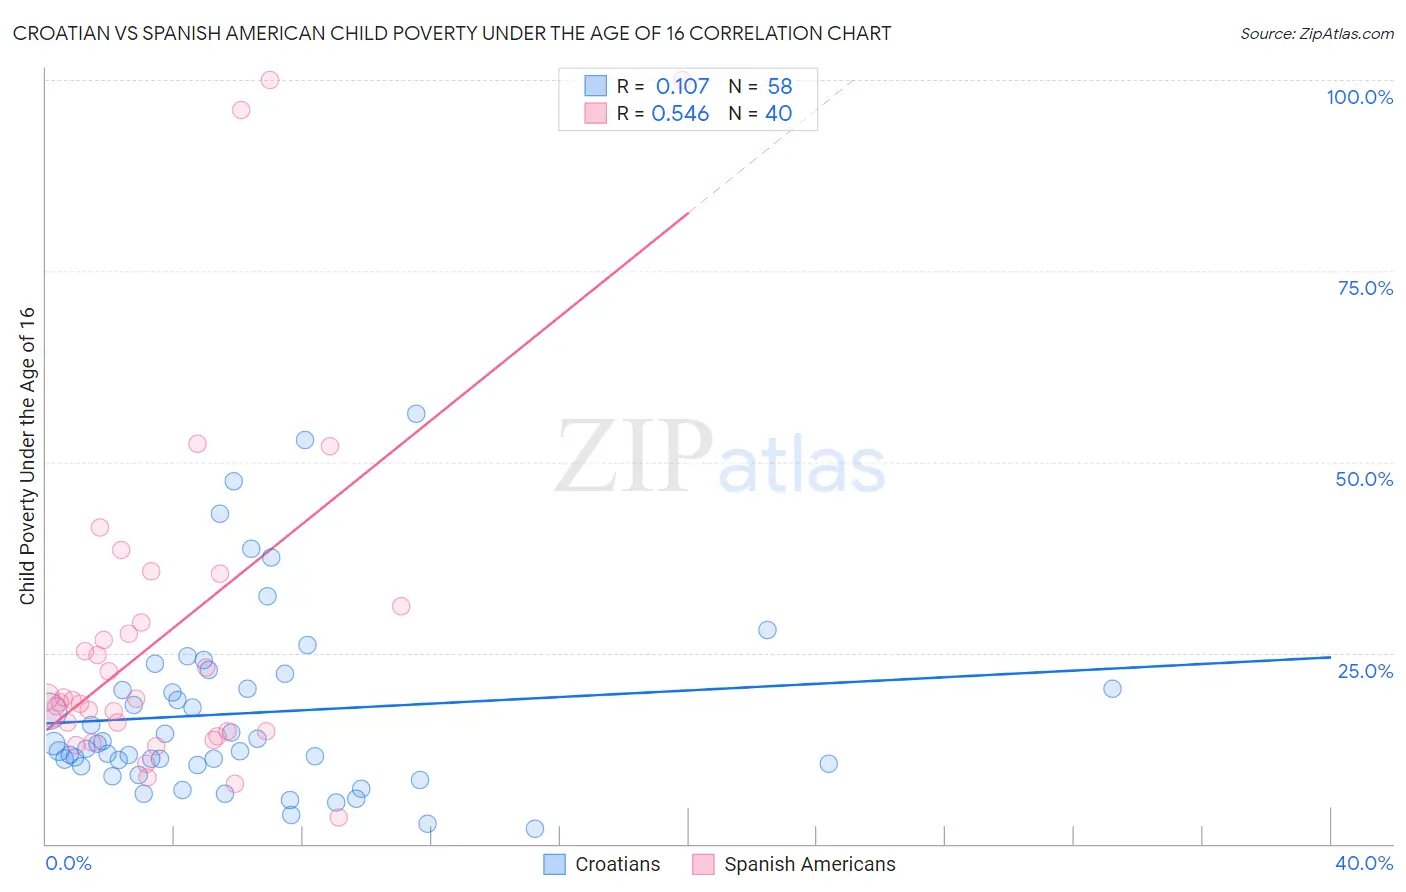 Croatian vs Spanish American Child Poverty Under the Age of 16